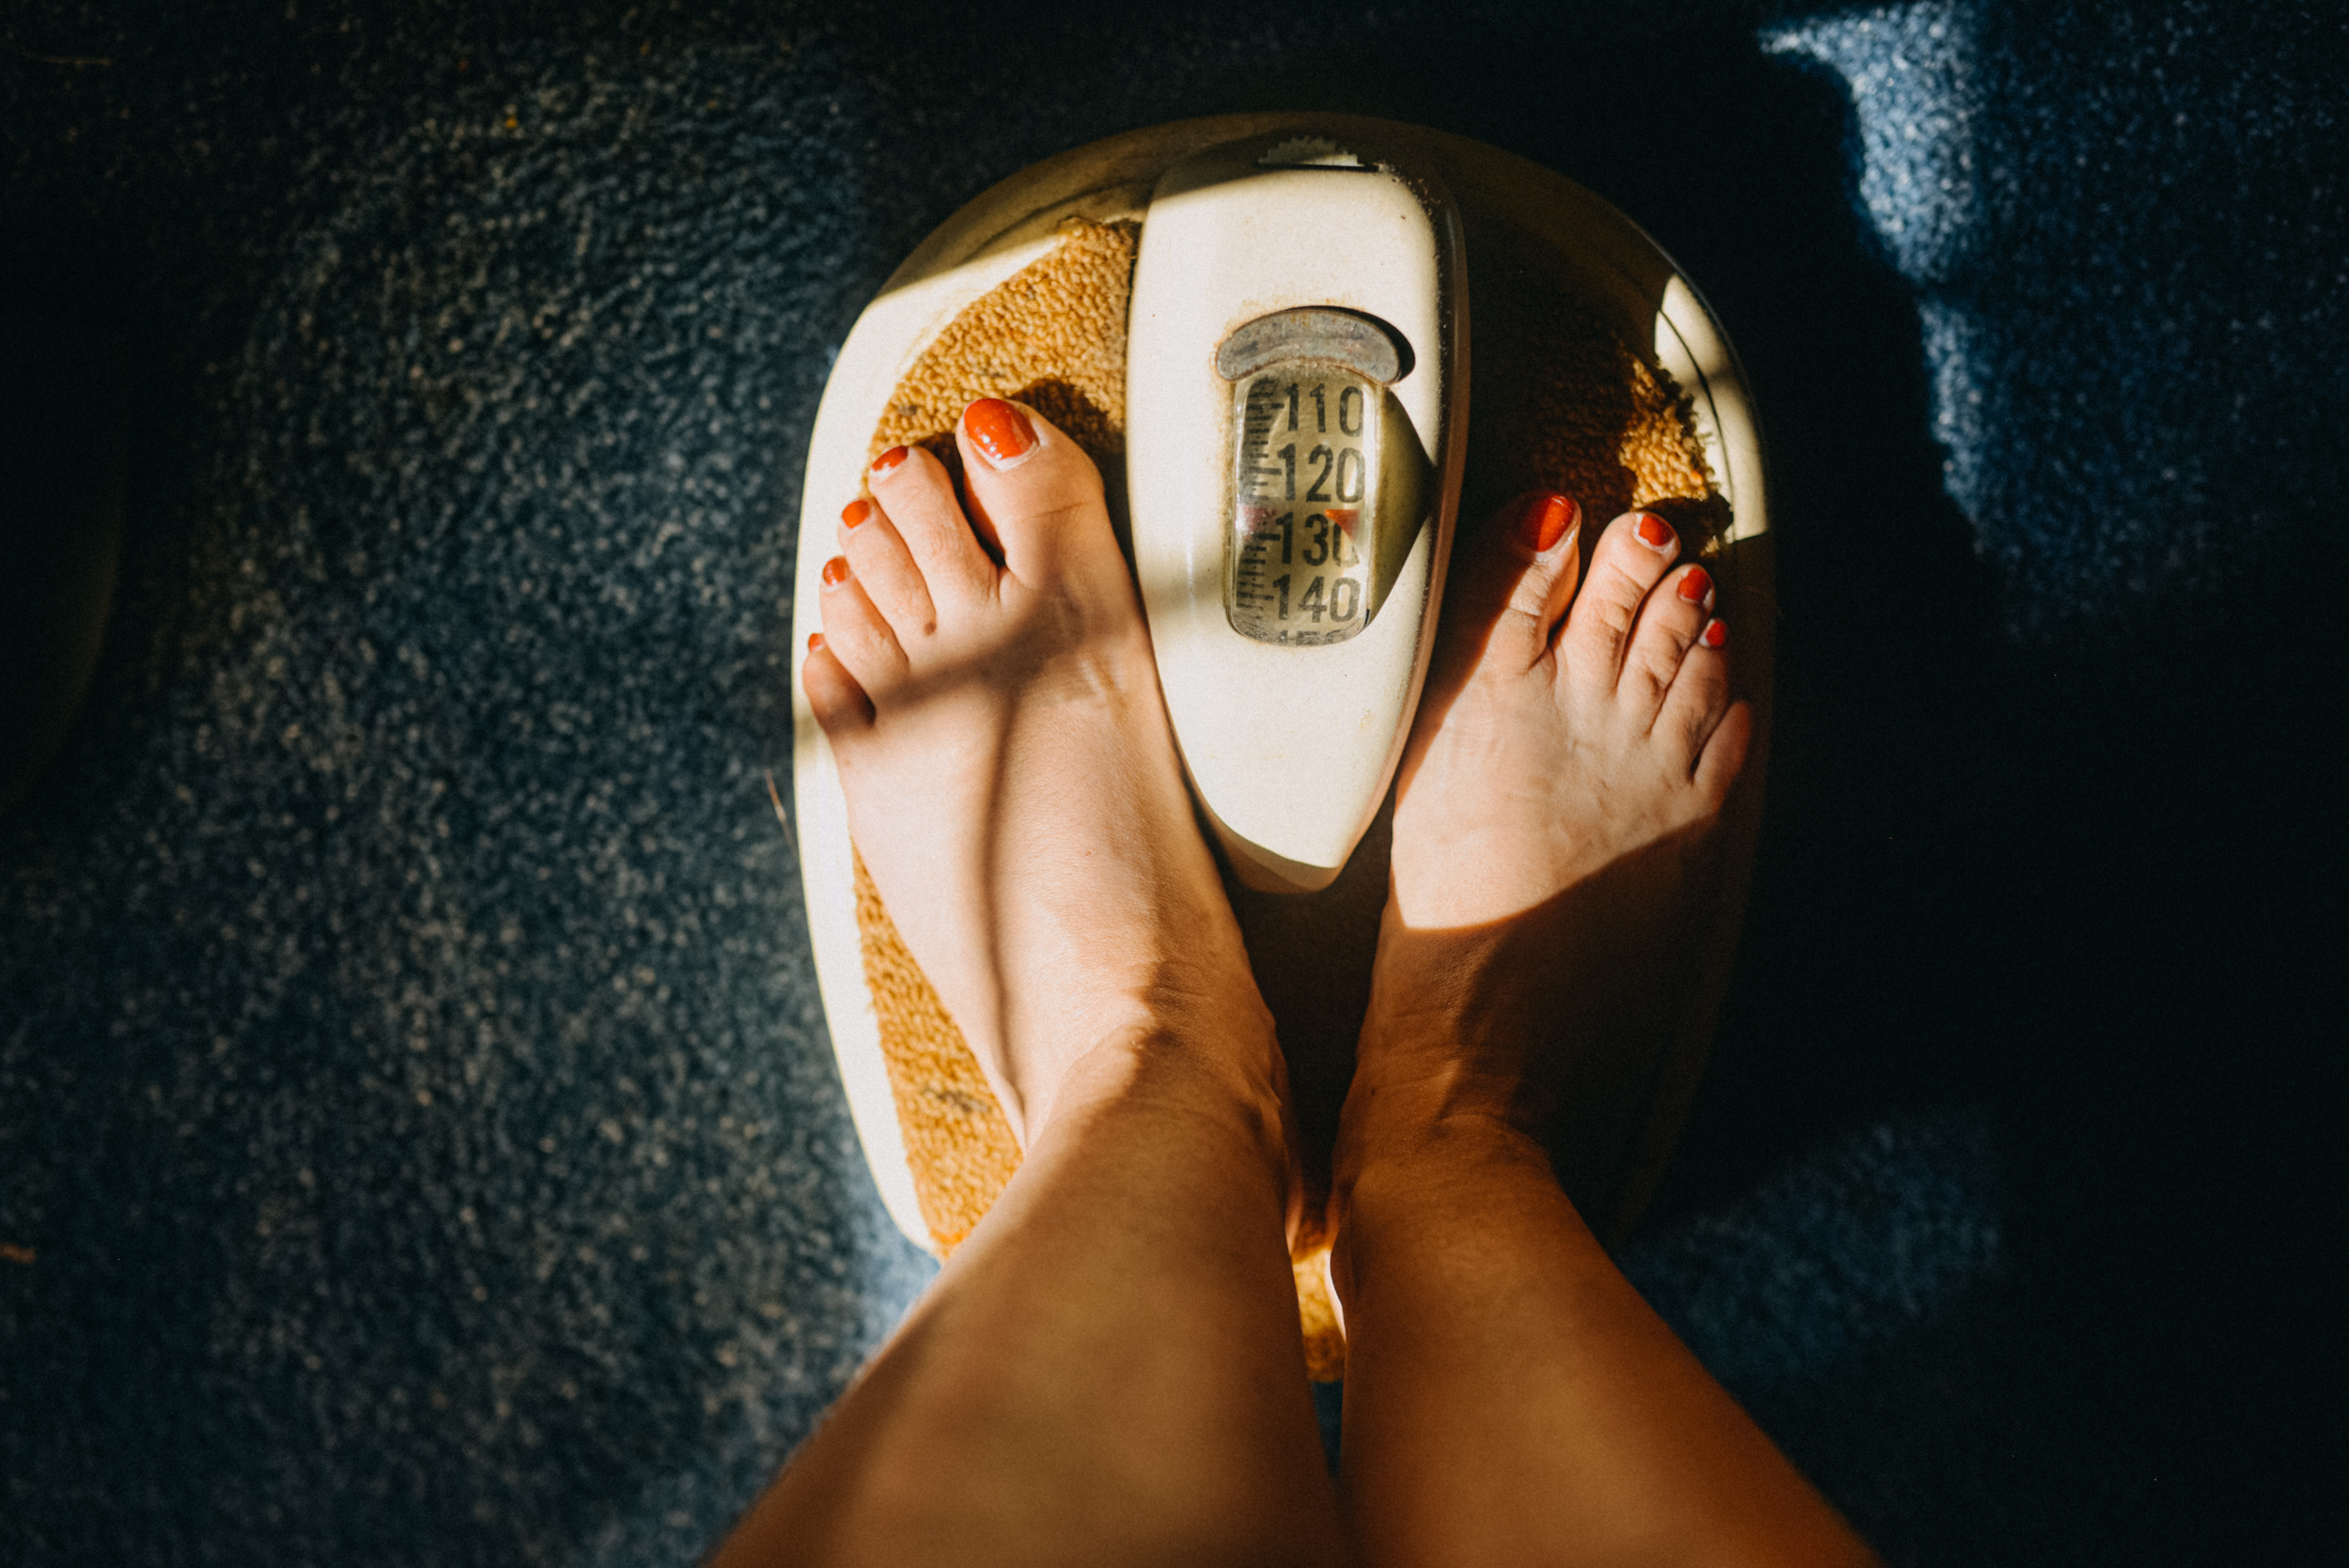 Close-up of a person&#x27;s feet on a mechanical bathroom scale